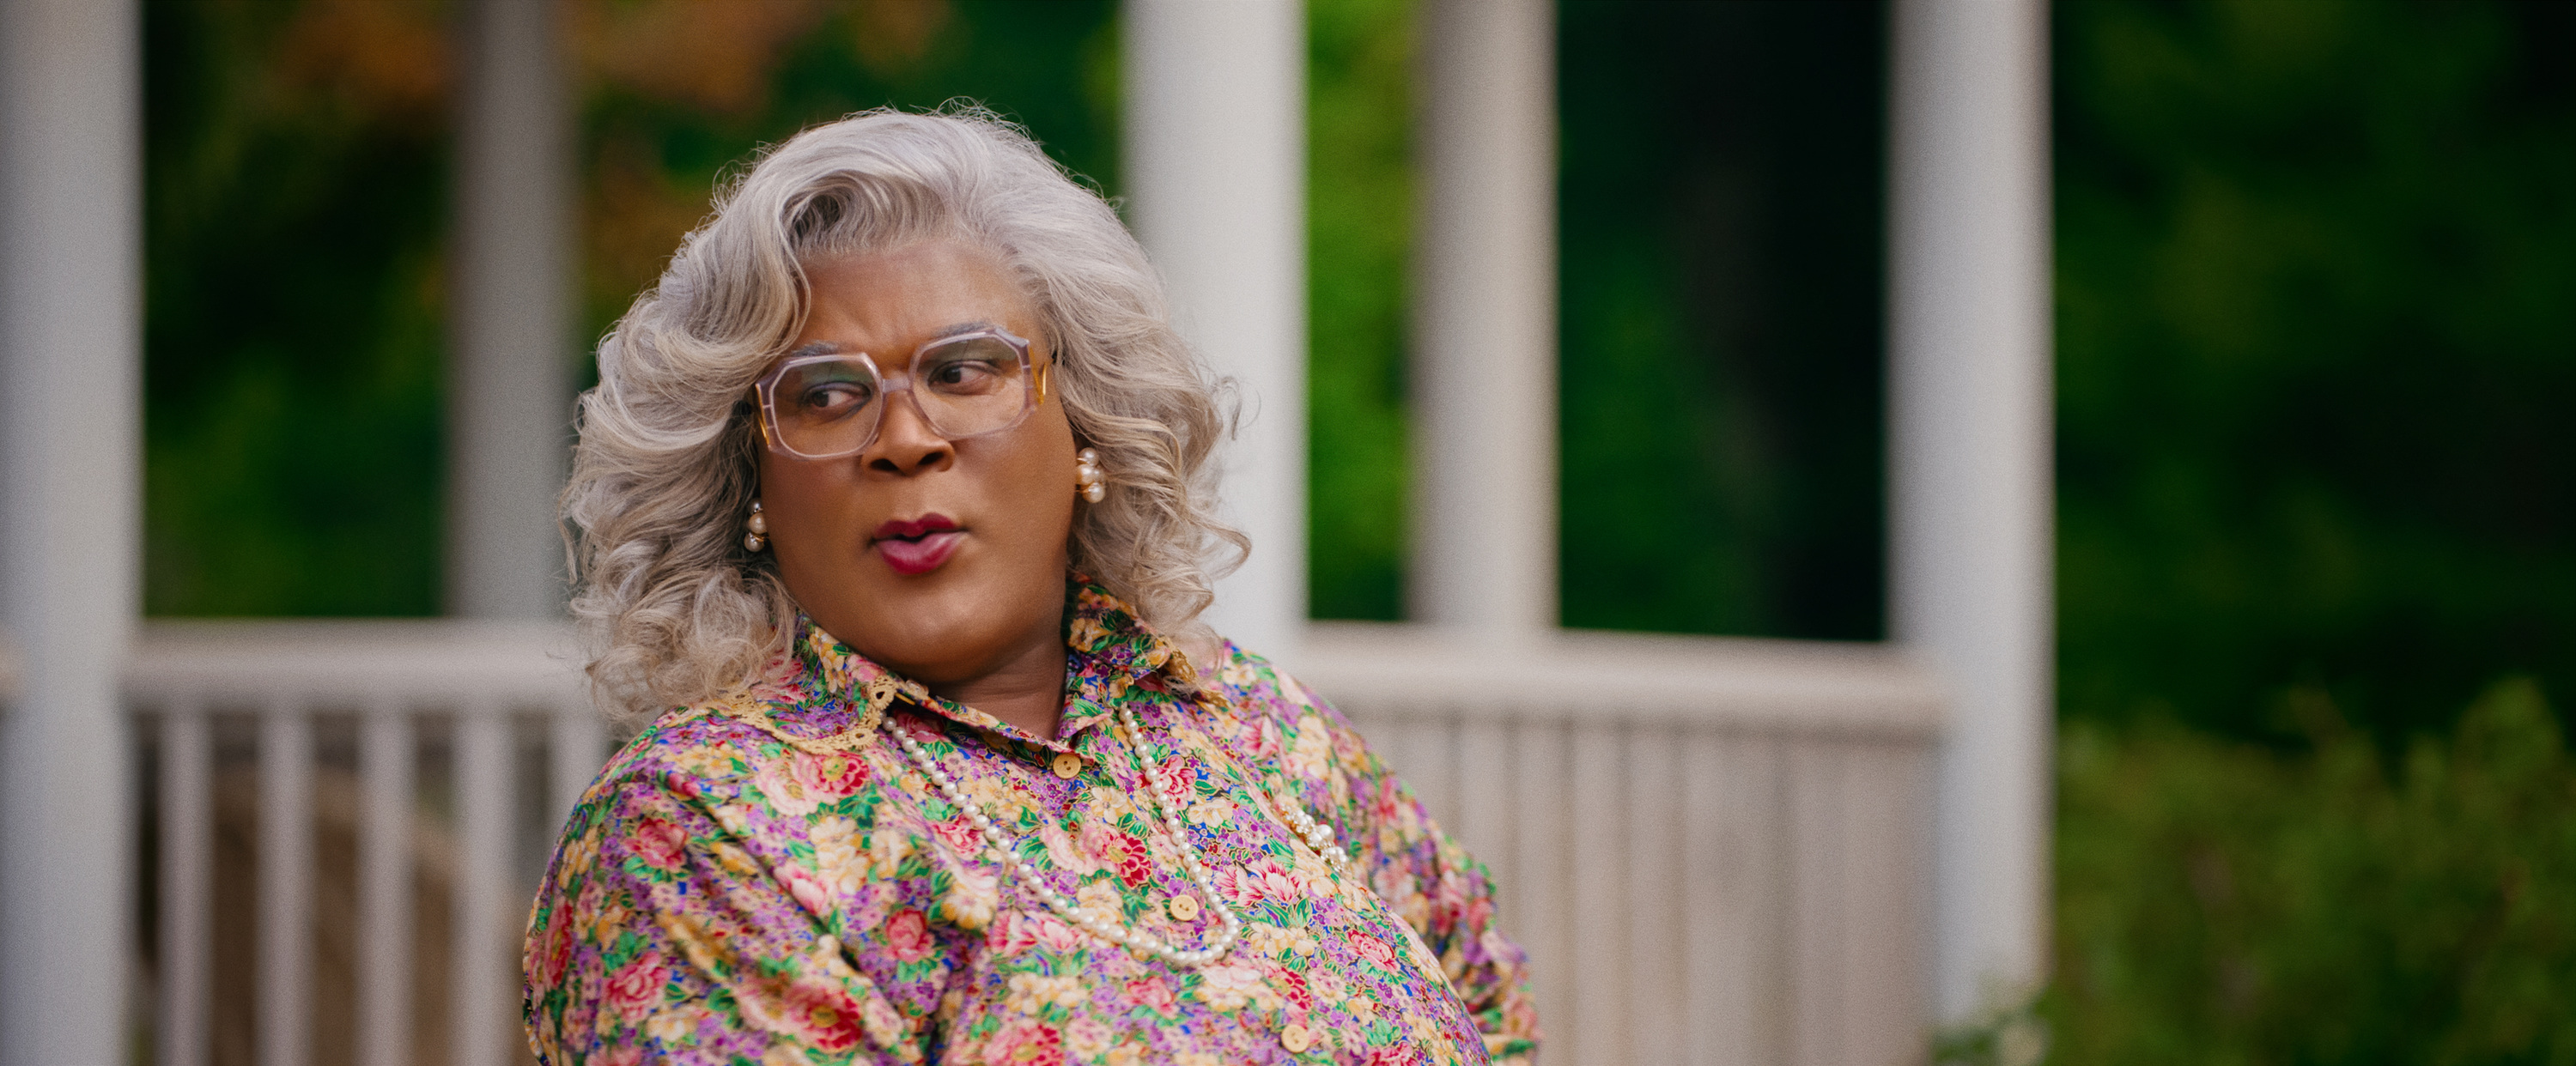 Exclusive: Tyler Perry On Madea's Return To The Screen In 'A Madea Homecoming,' Beyoncé's Epic Reaction And Much More